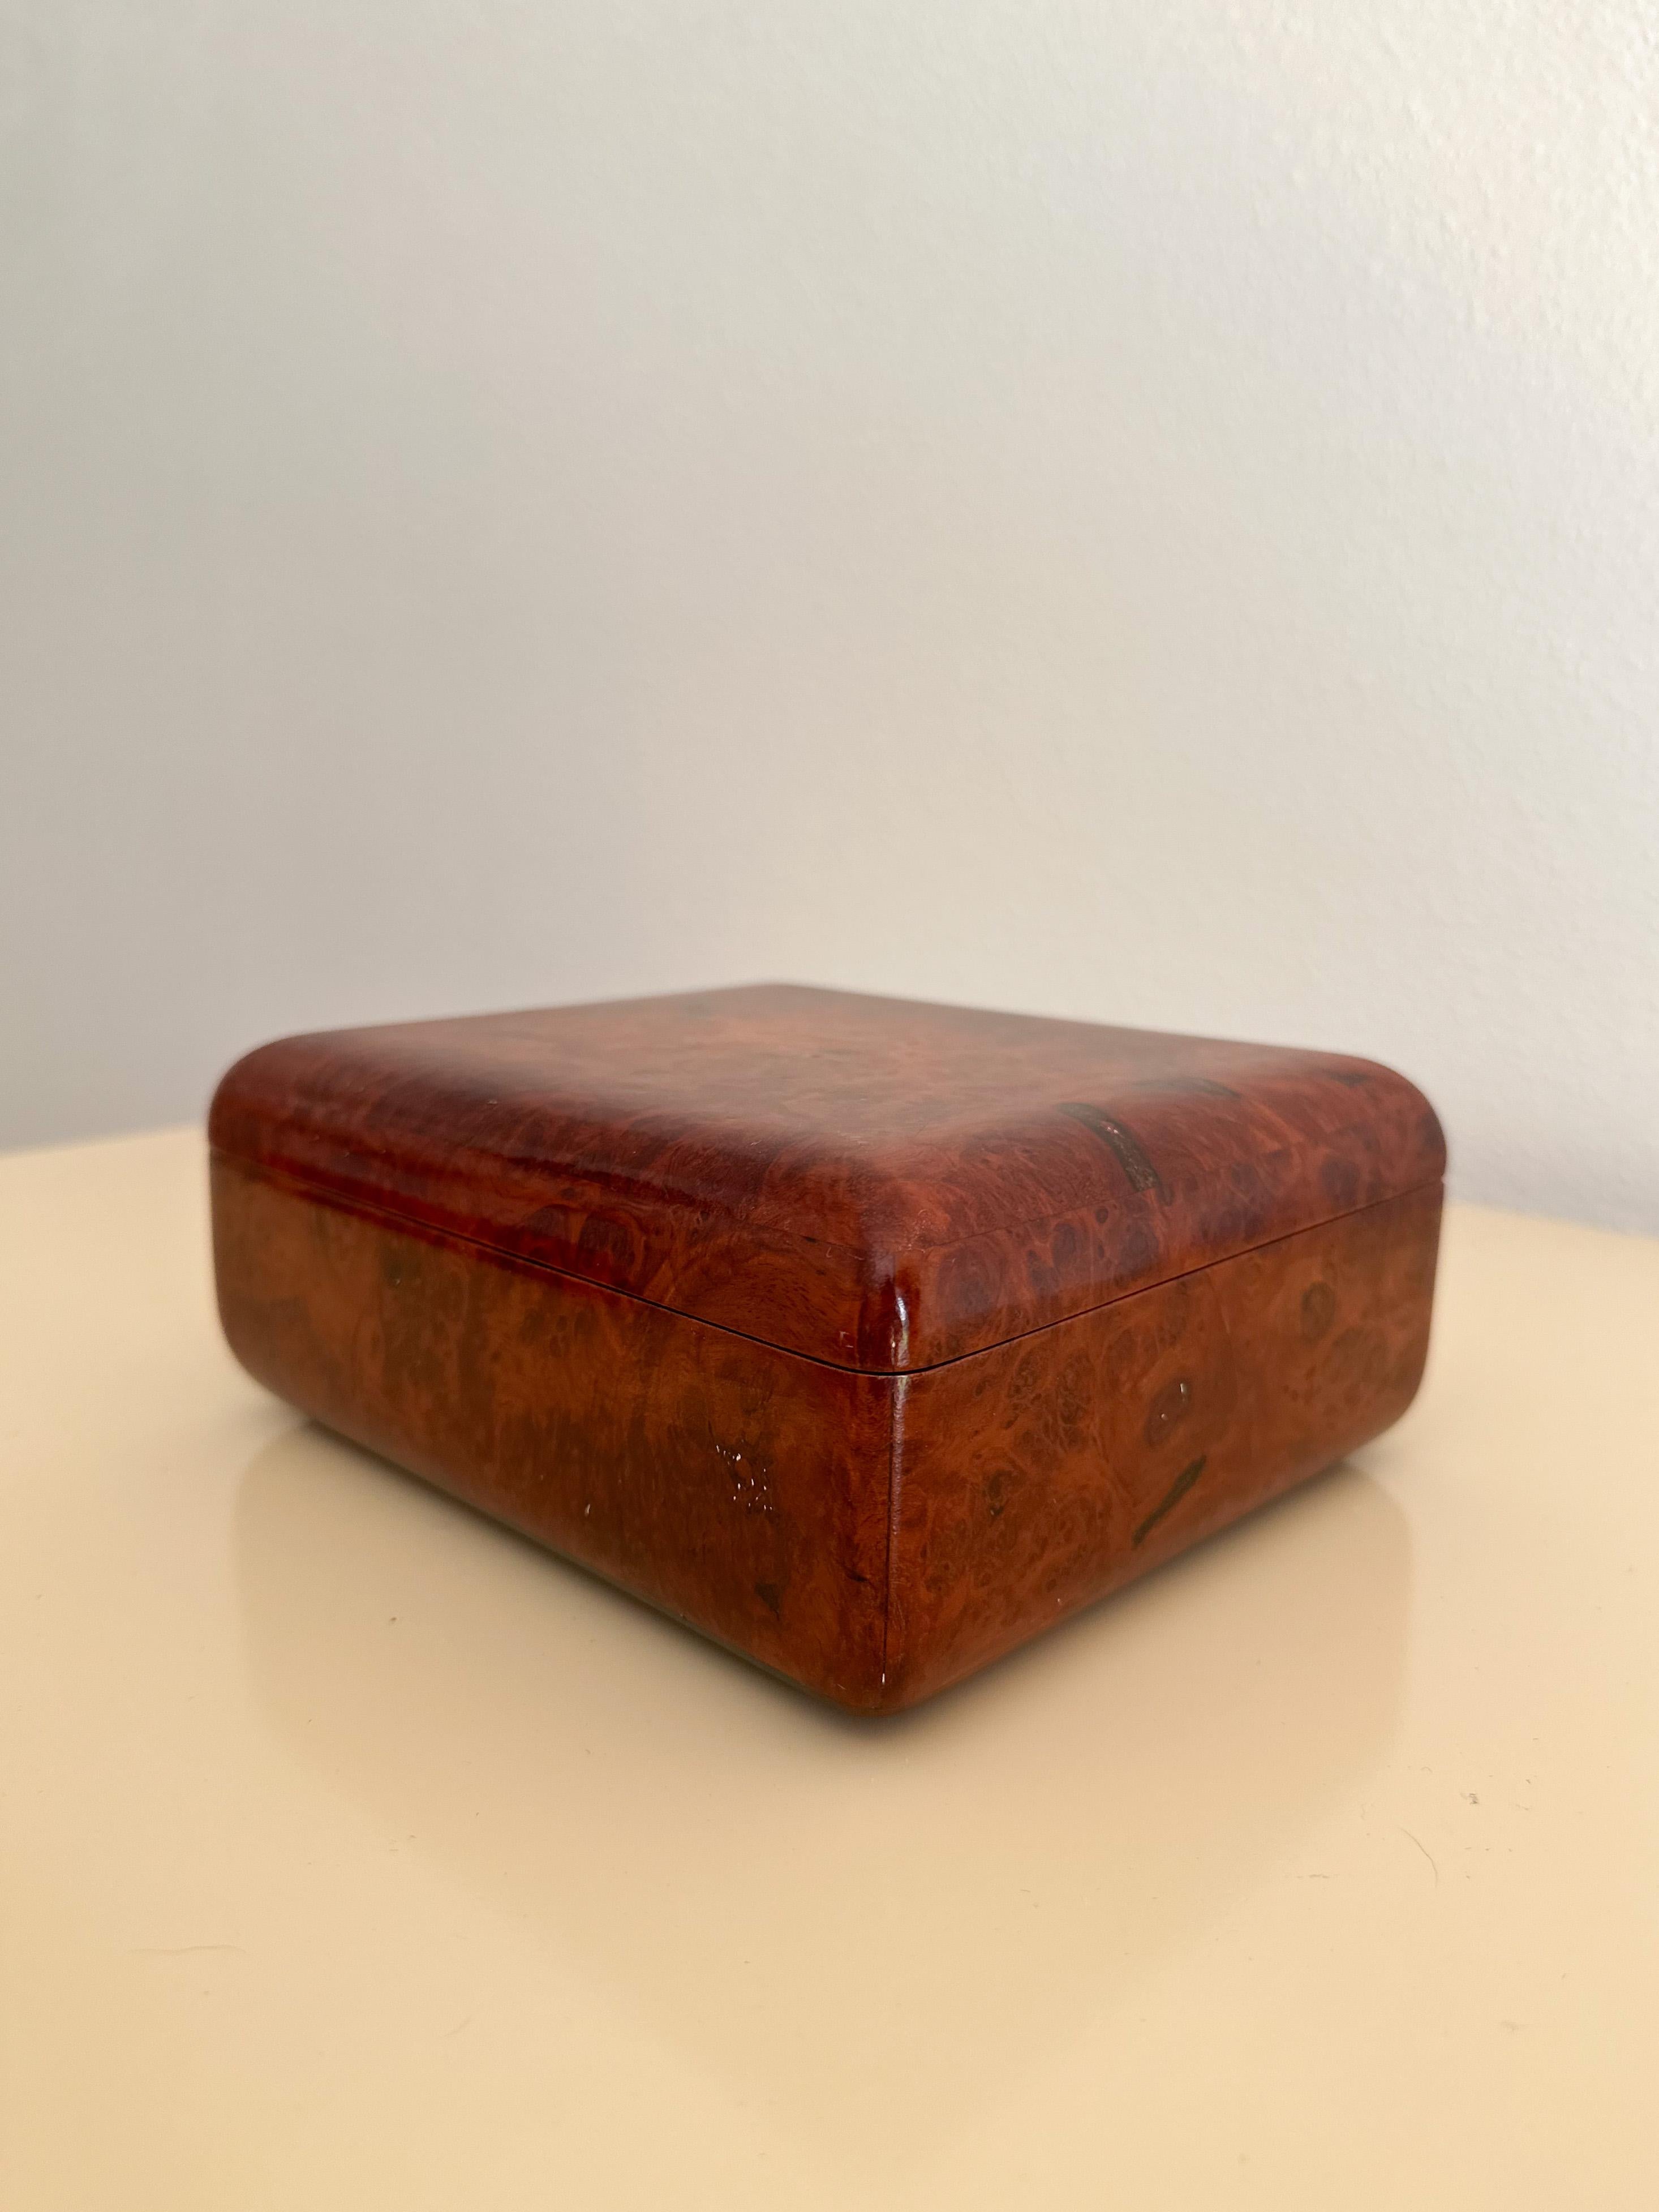 Beautiful lacquered burlwood box with rounded edges and hinged top, perfect for storing jewelry, cigars, etc. Medium-dark brown with red tones and beautiful grain. In great vintage condition with minor pitting.